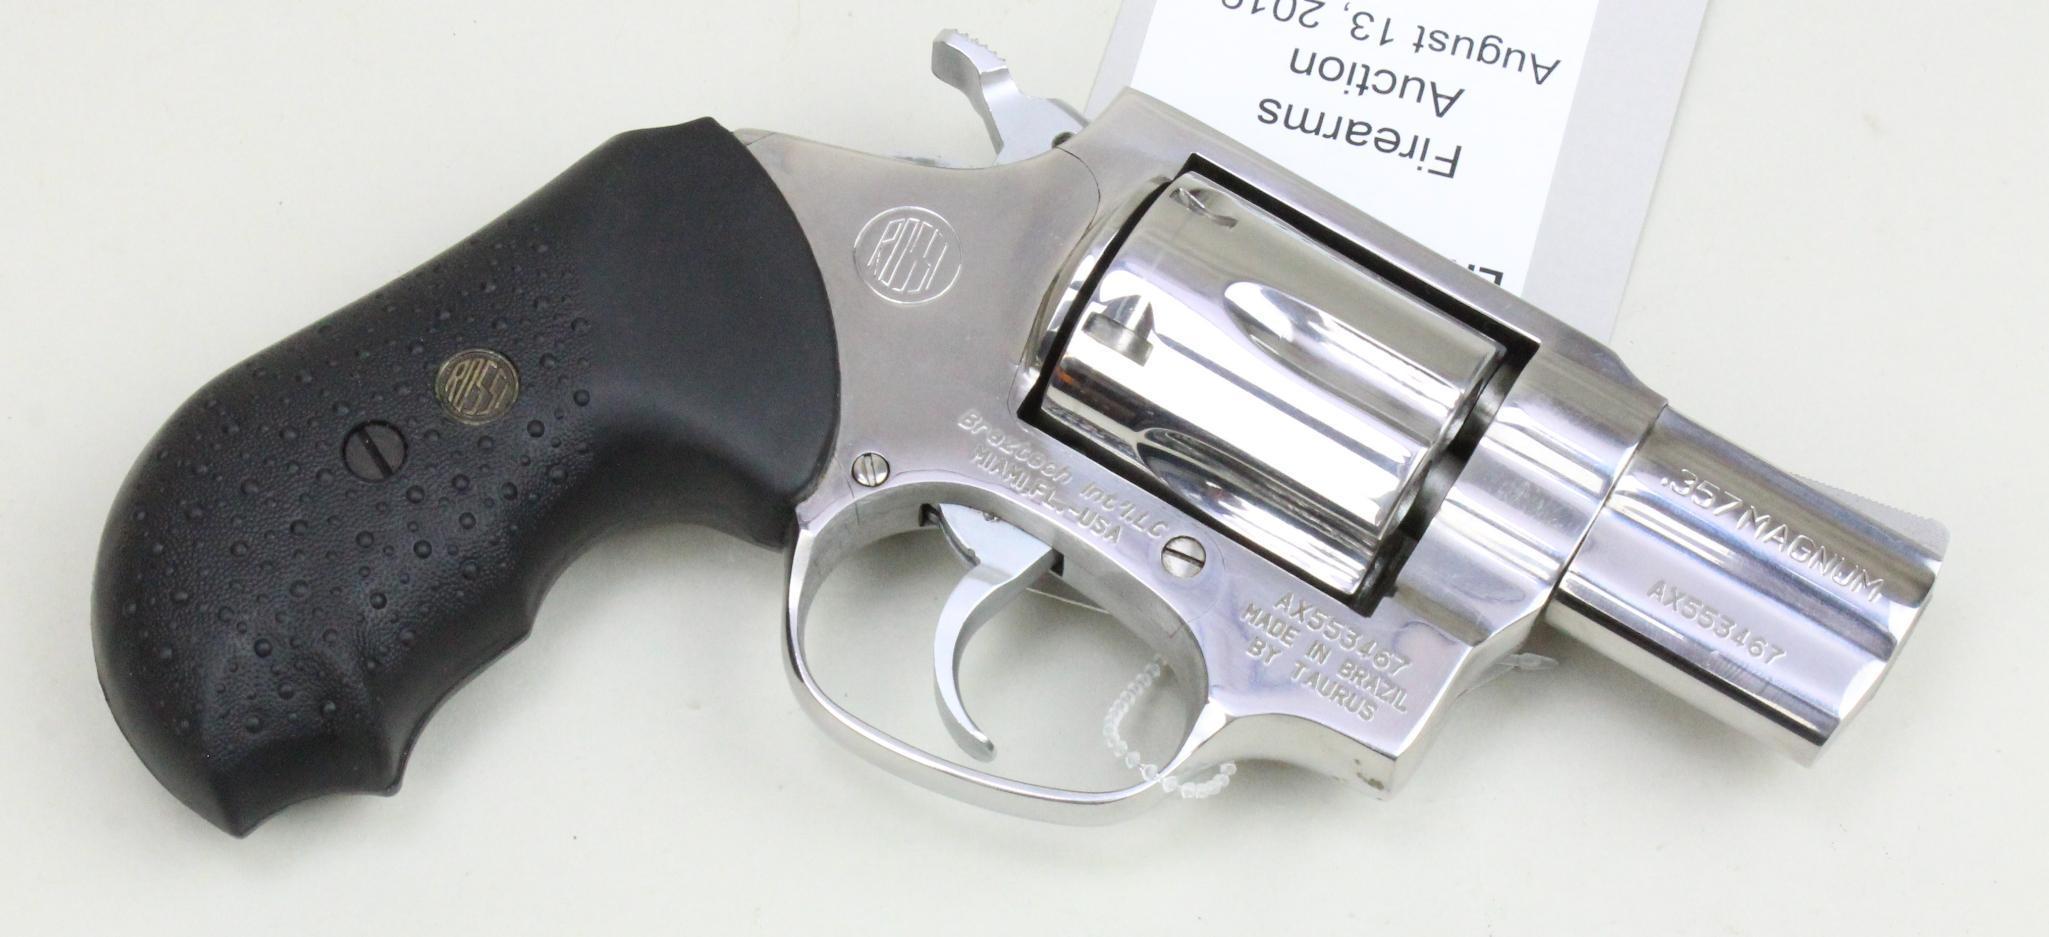 Rossi R462 double action revolver.